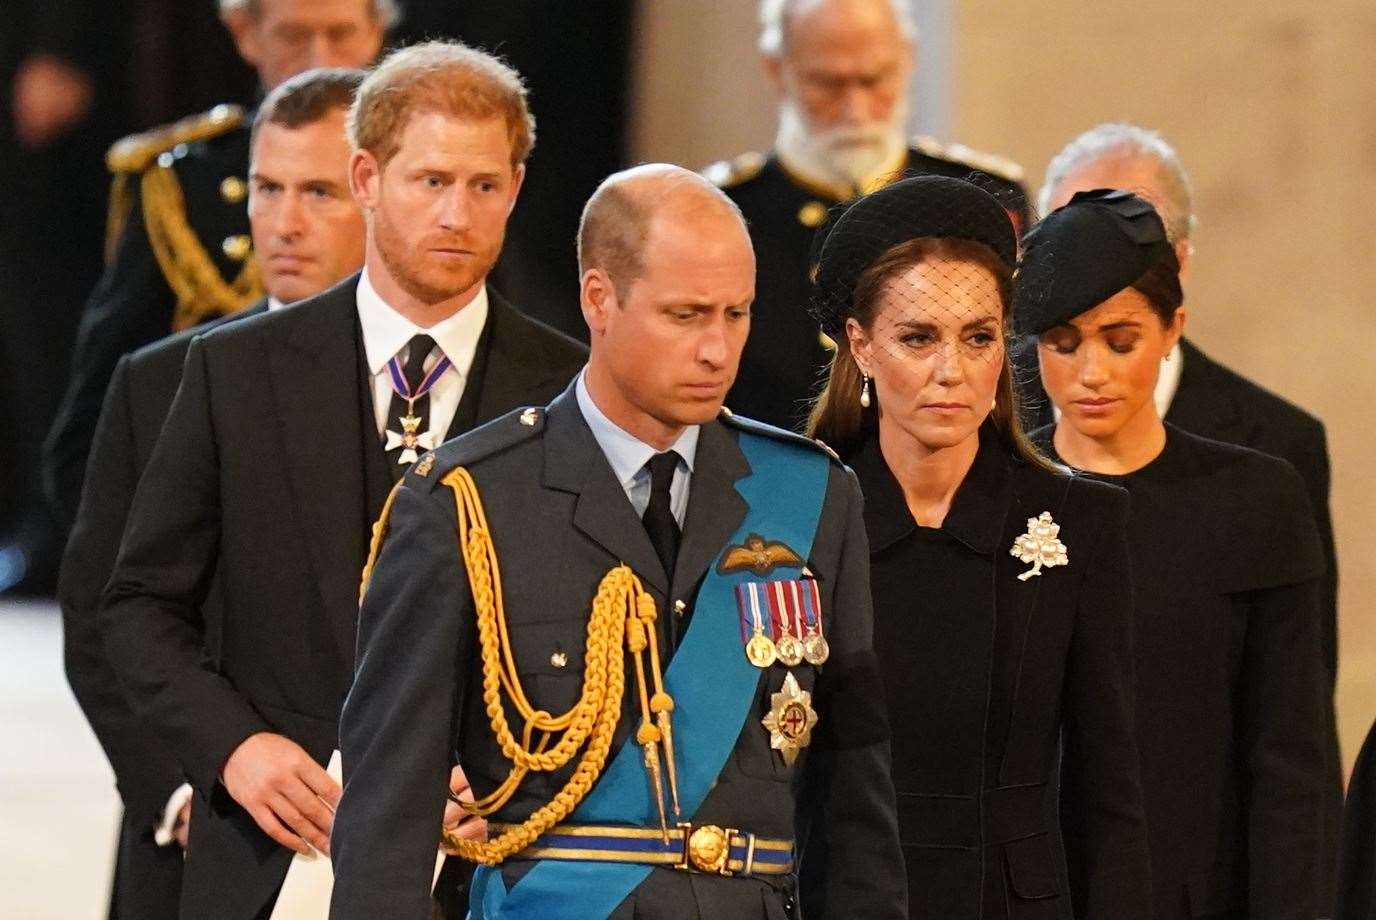 Meghan and Harry pictured attending events around the Queen’s funeral (Jacob King/PA)